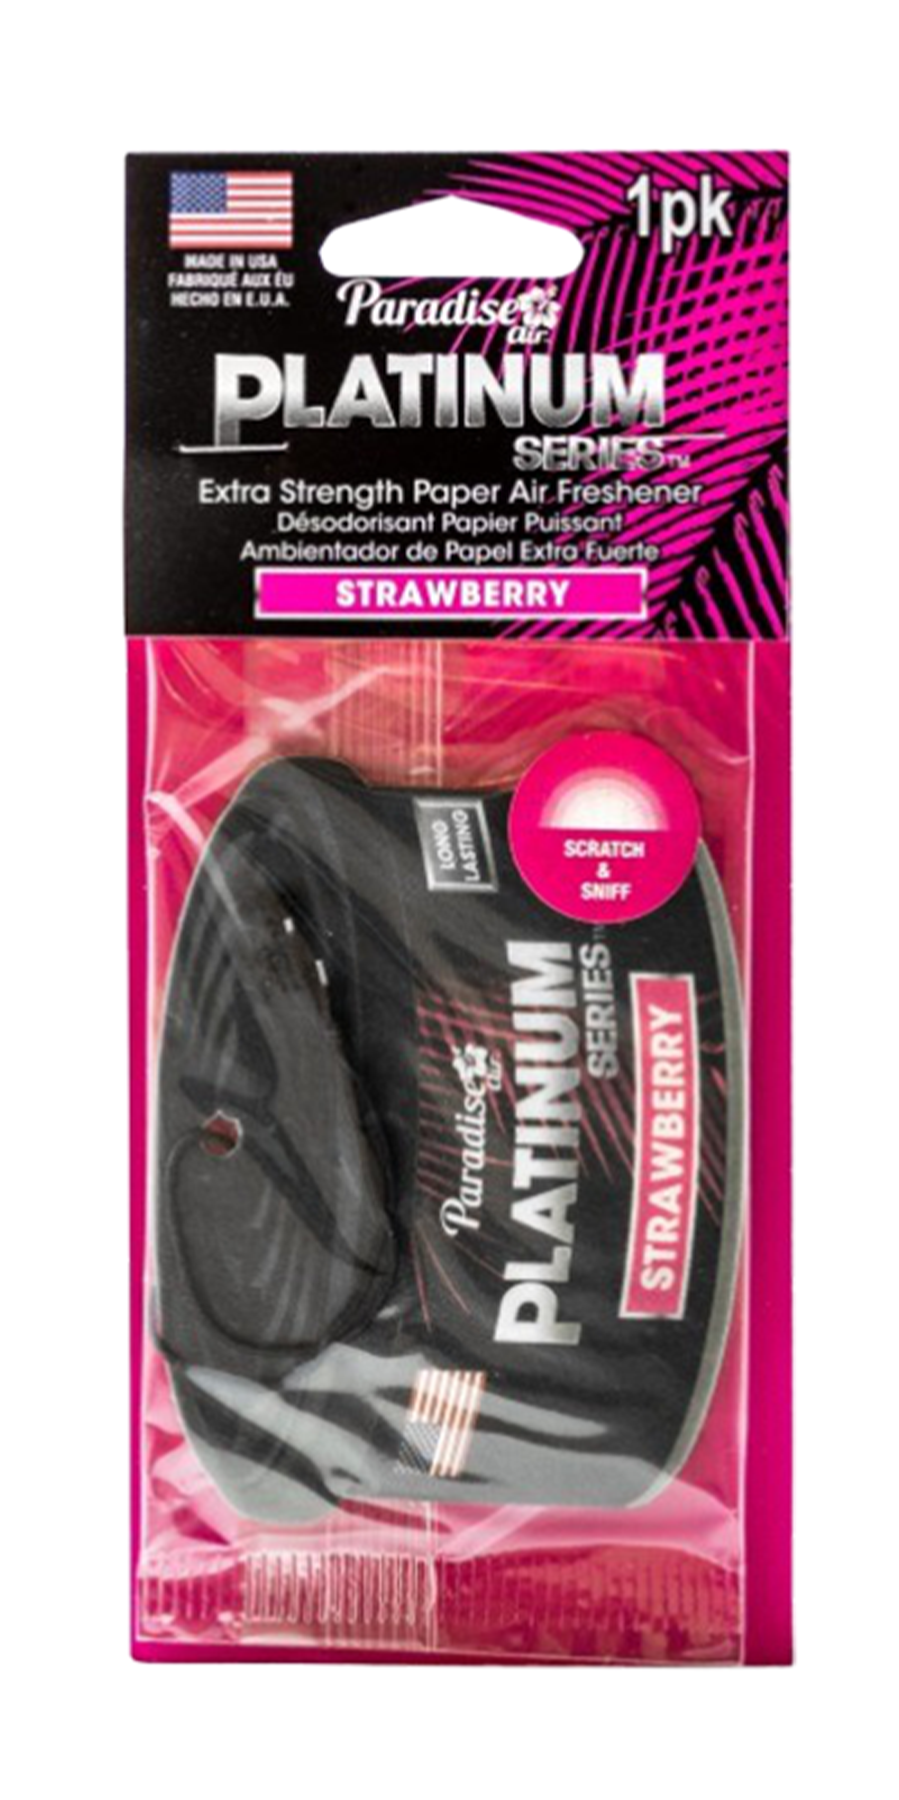 An air freshener from the "Paradise Air Platinum Series." The scent is labeled "Strawberry." It's an extra strength paper air freshener designed for longer-lasting fragrance. The product also boasts a "scratch & sniff" feature, allowing consumers to sample the scent before purchase. The air freshener is indicated as being made in the USA.